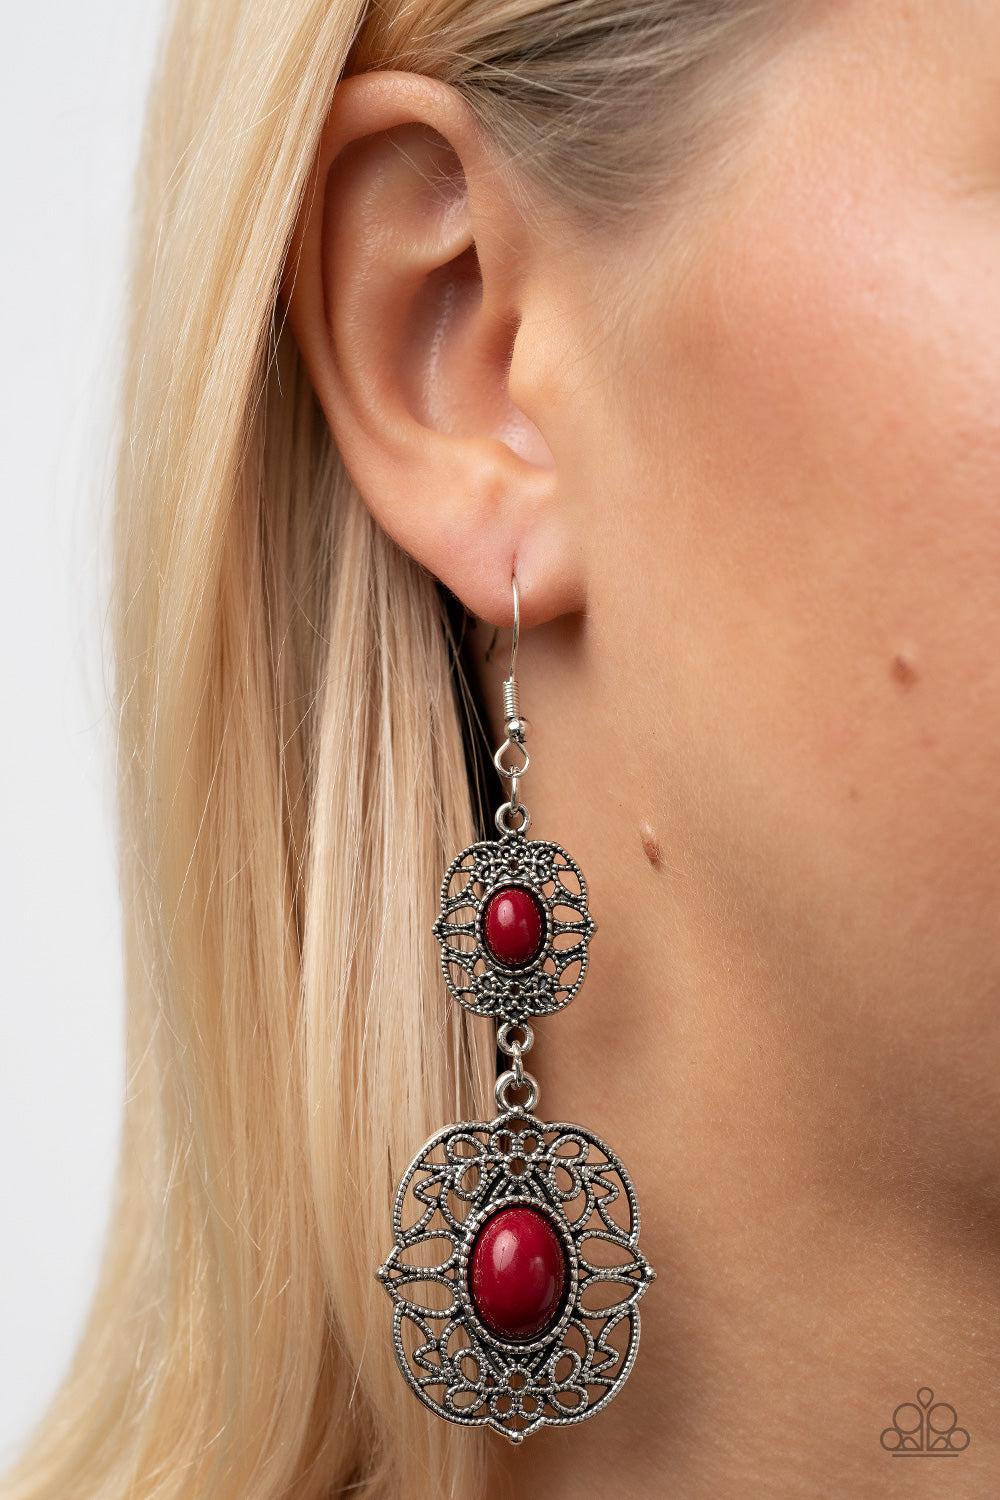 Victorian Villa Red Earrings - Paparazzi Accessories- lightbox - CarasShop.com - $5 Jewelry by Cara Jewels